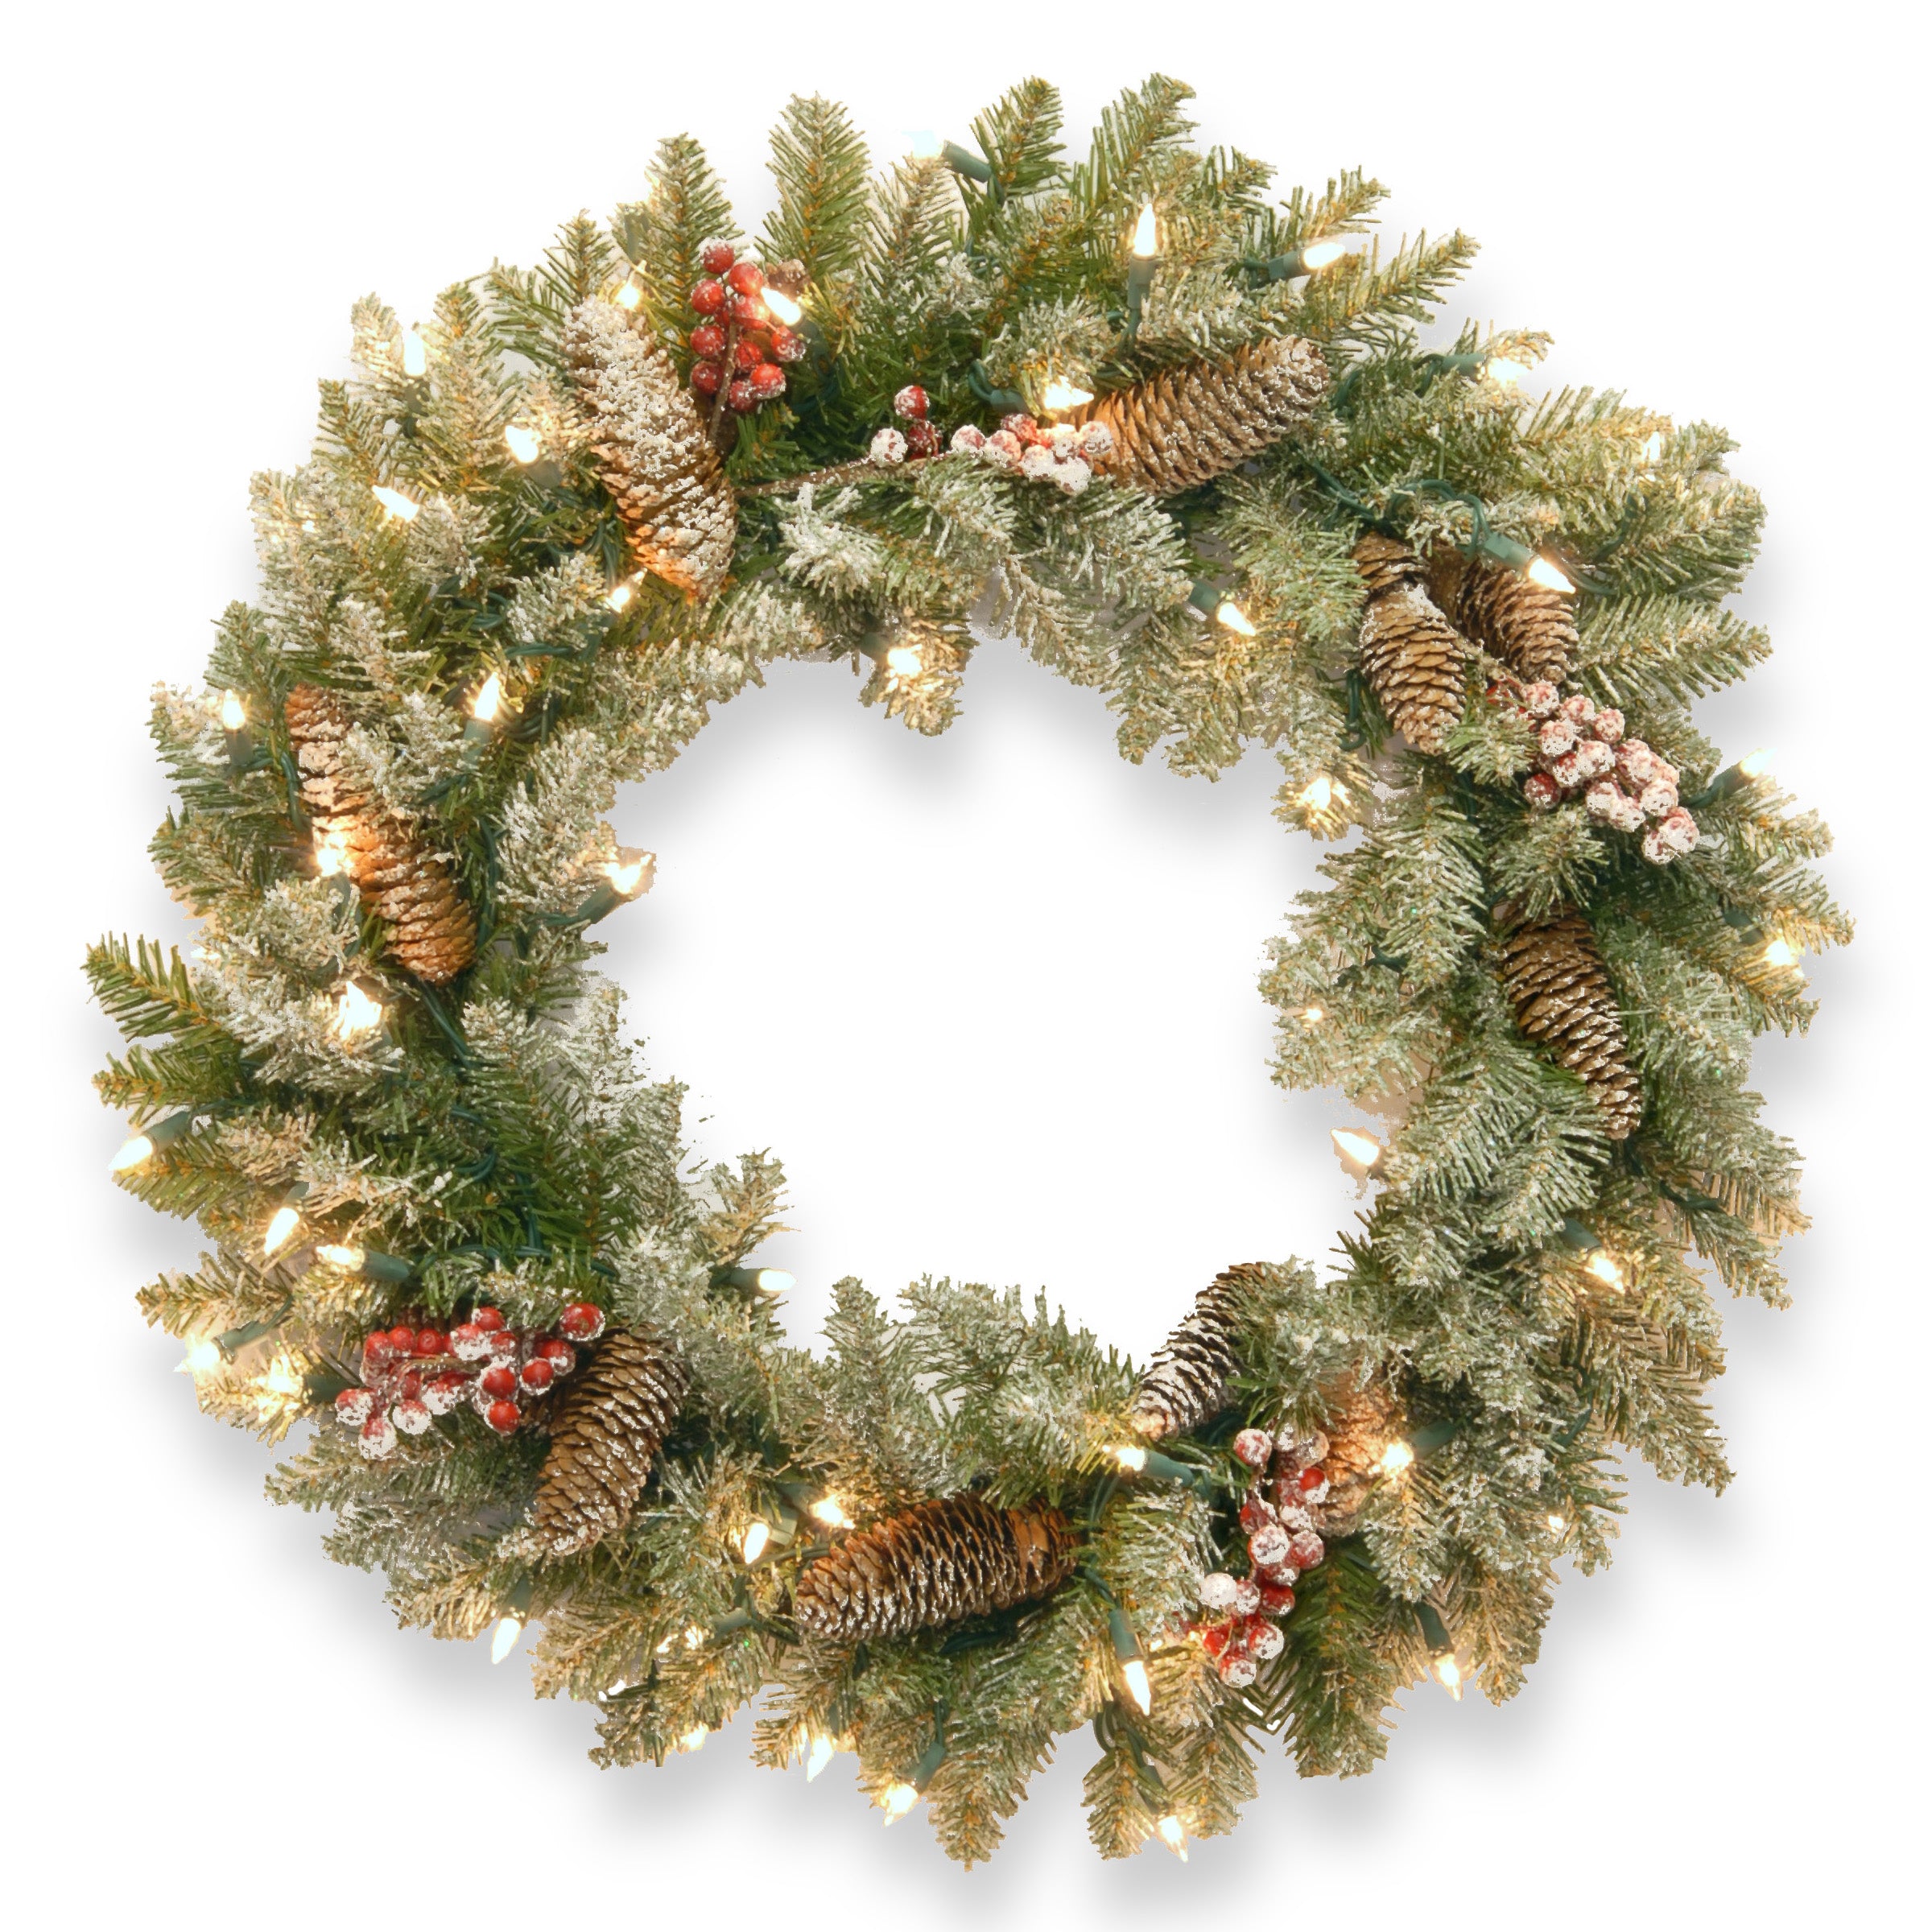 National Tree Duf-300-30w-1 30" Dunhill Fir Wreath With Snow, Red Berries, Cones And 50 Clear Lights 50 Clear Lights